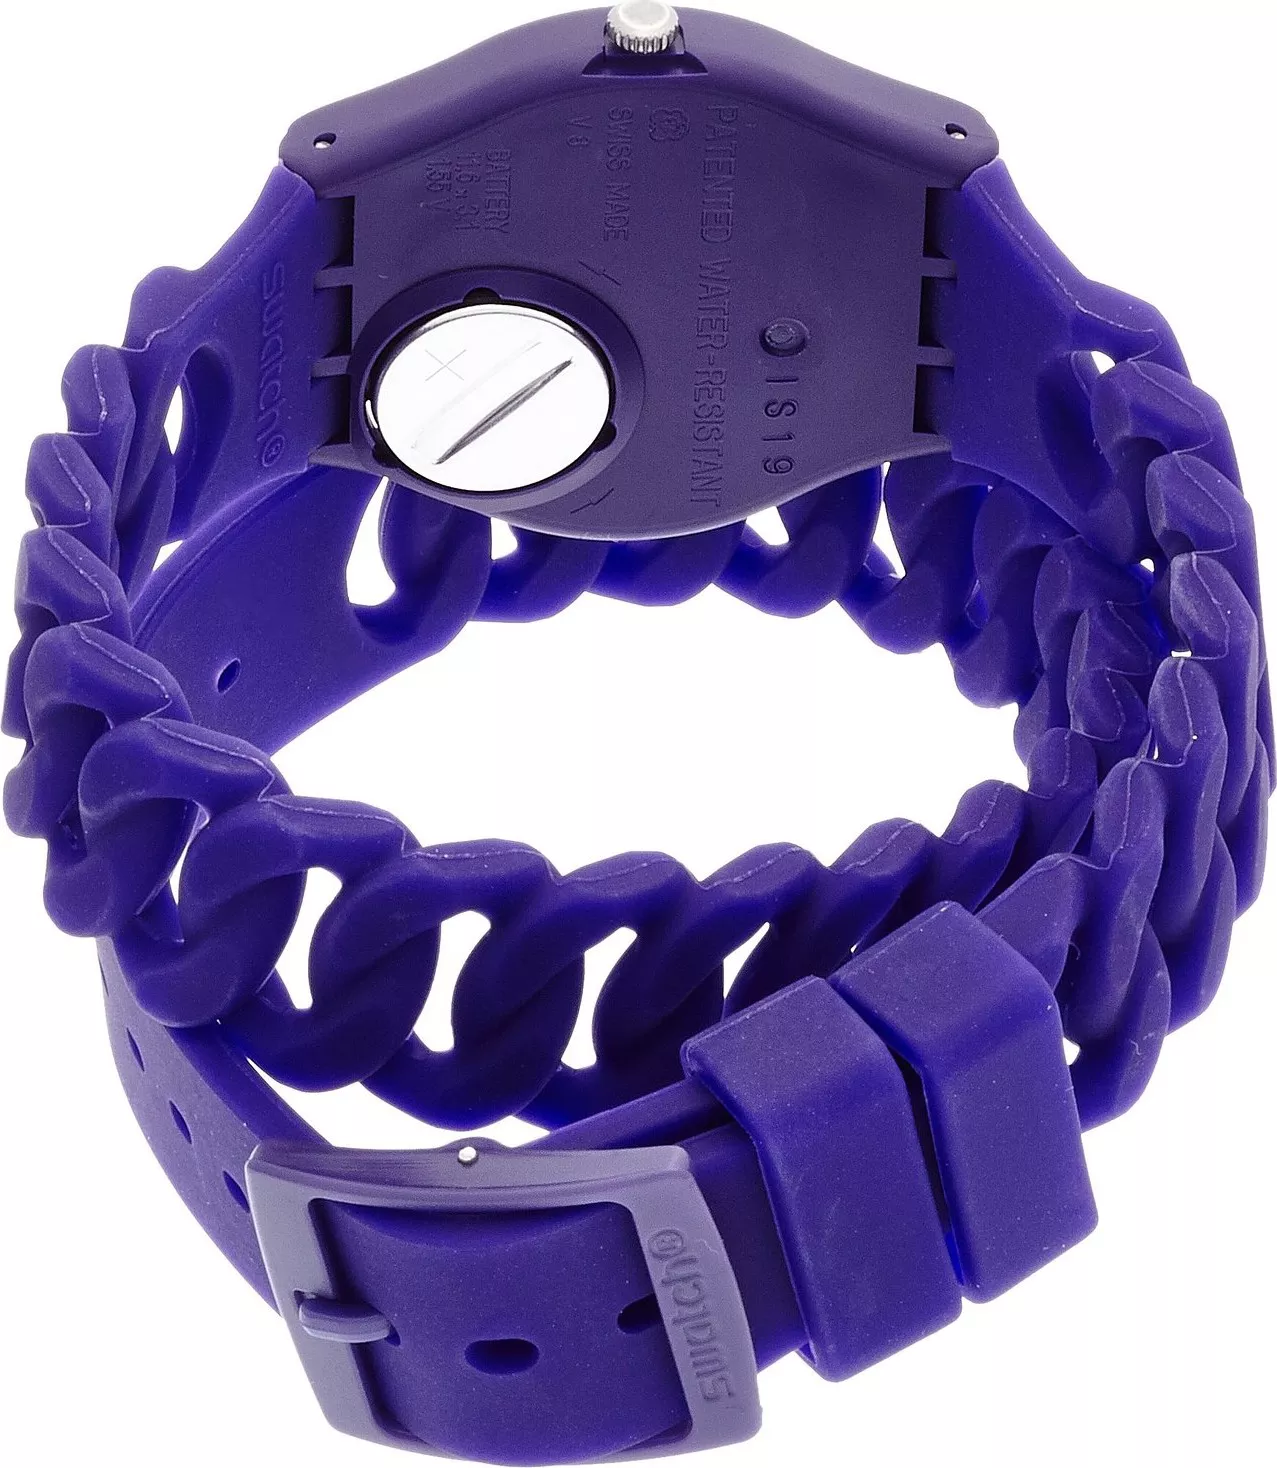  SWATCH PURPBELL PURPLE SILICONE MENS WATCH, 34MM